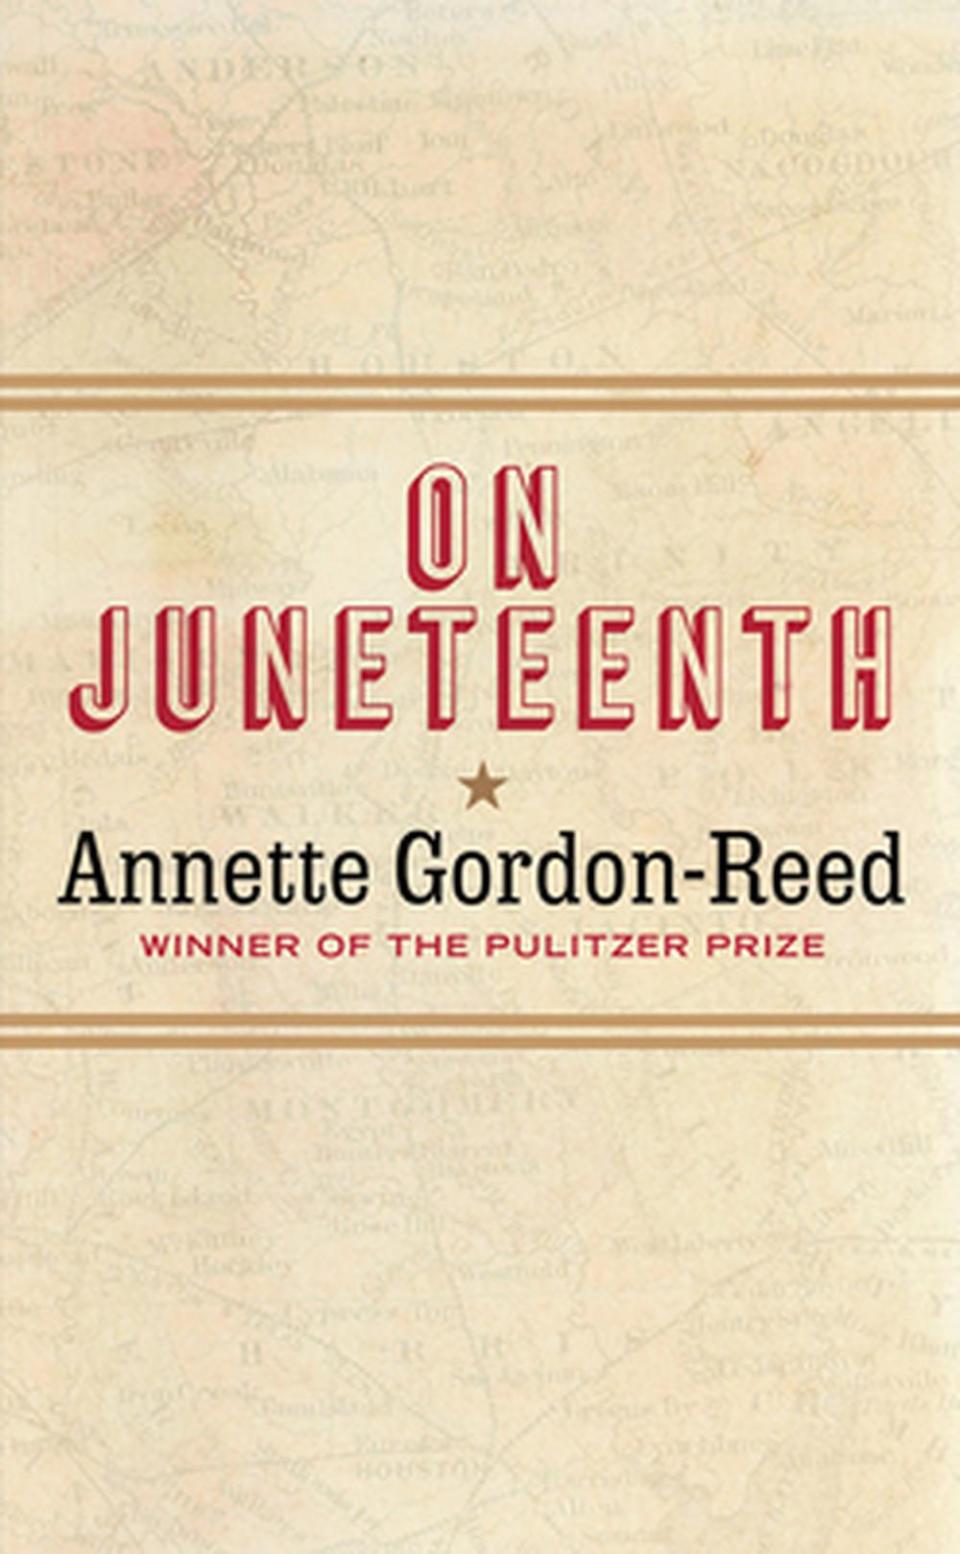 "On Juneteenth" by Annette Gordon-Reed is a series of essays on memory, race and history.